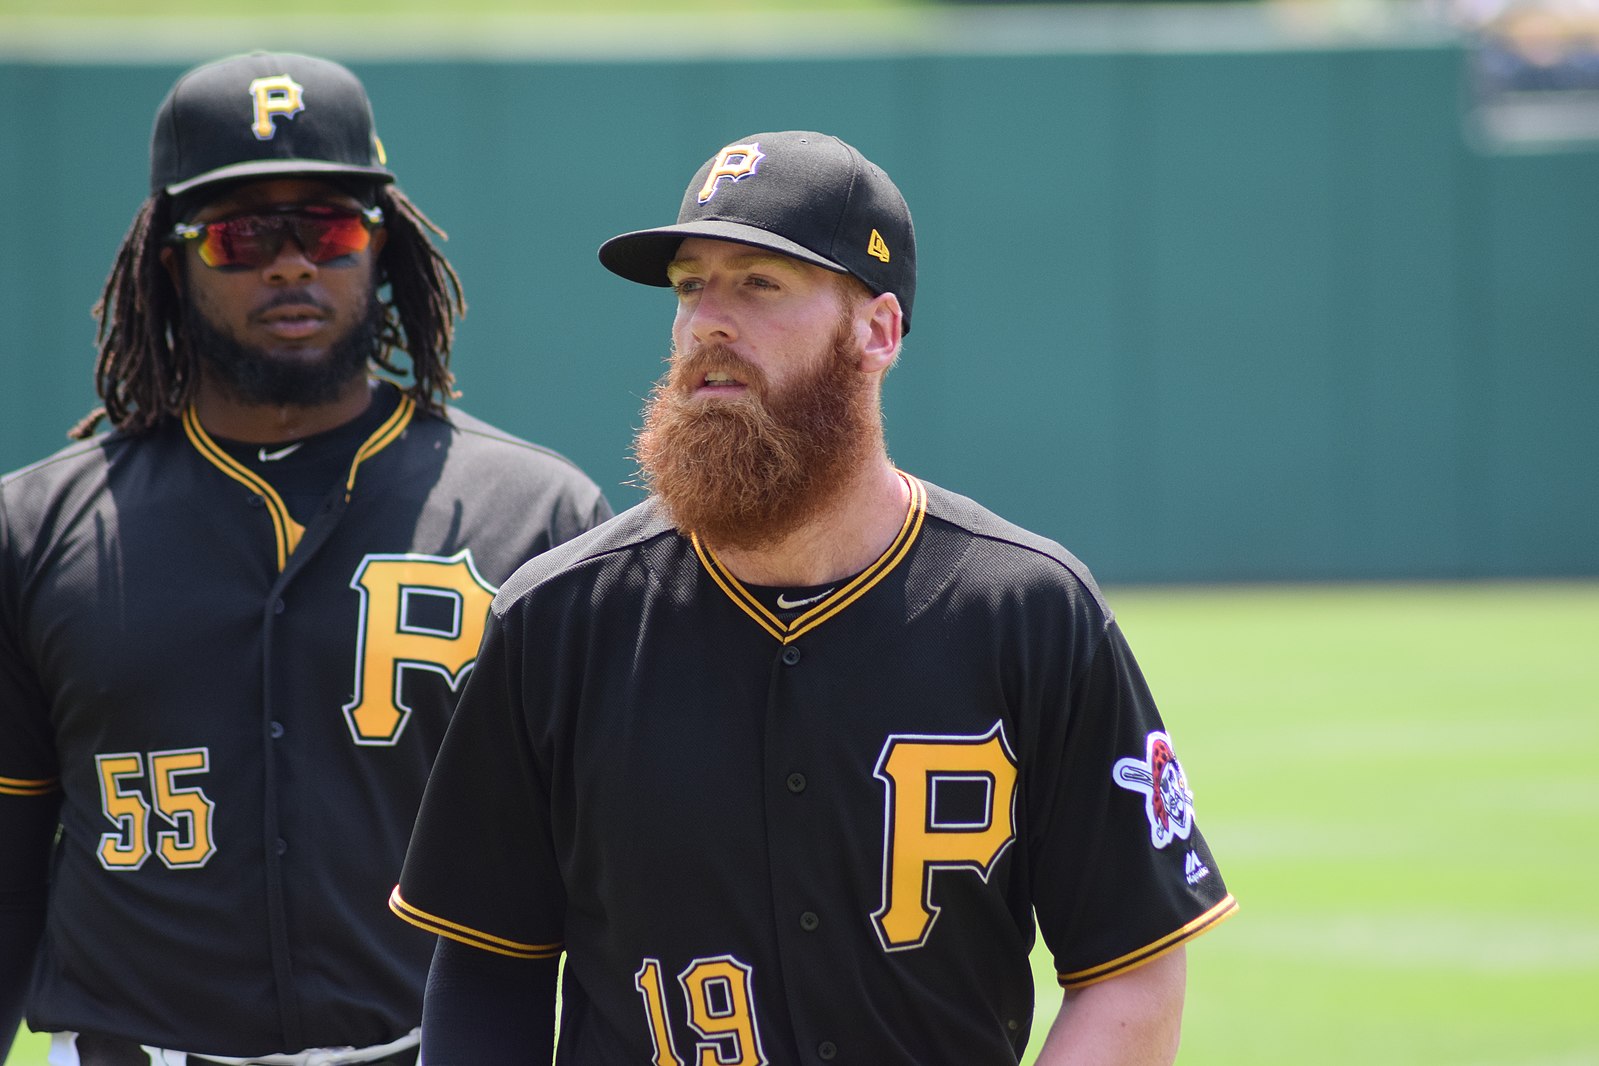 MLB Predictions on Where the Pittsburgh Pirates Will Finish the 2021 Season